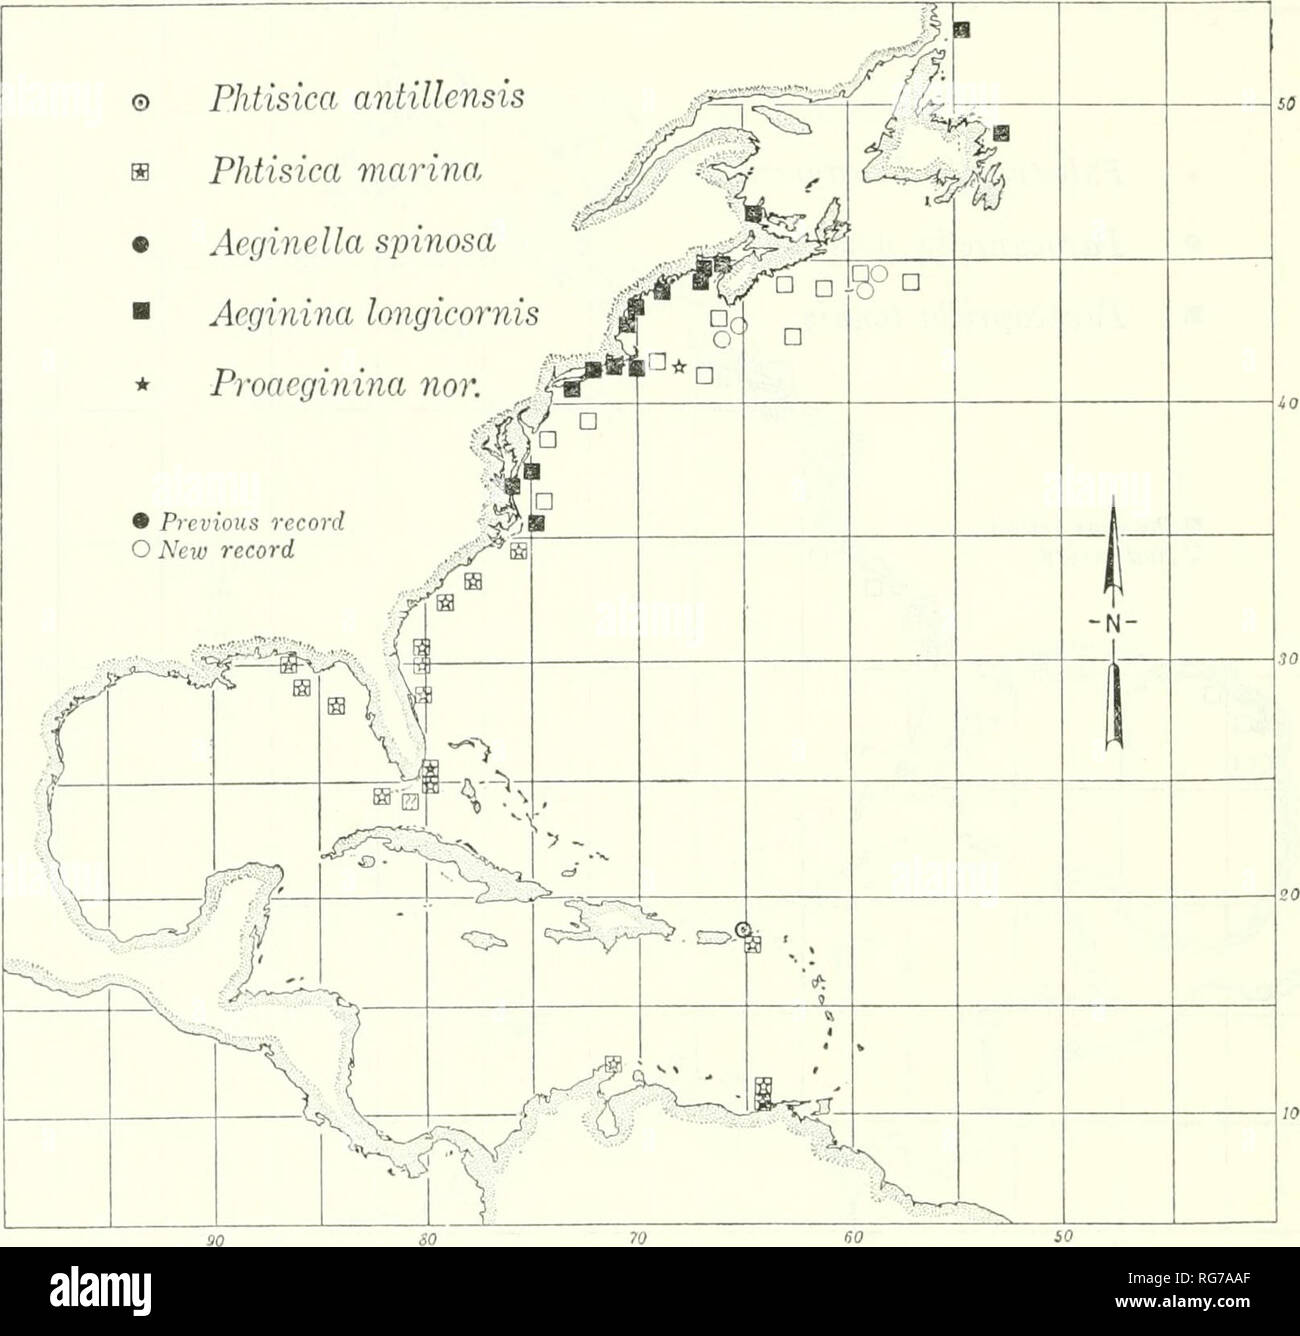 . Bulletin - United States National Museum. Science. 106 U.S. NATIONAL MUSEUM BULLETIN 2 78. Figure 54.—Distribution records of Aeginella spinosa, Aeginina longicornis, Phtisica antil- lensis, Phtisica marina, and Proaeginina norvegica in the western North Atlantic. Mayer (1903, p. 133) expresses the opinion that CaprelHdae are quite rare in the shallow water of the West Indies. Contrary to this opinion, 14 species of caprellids are reported from the Caribbean in this paper. Most of the caprellids of the area are fewer in number of individuals and smaller than those of the northern provinces.  Stock Photo